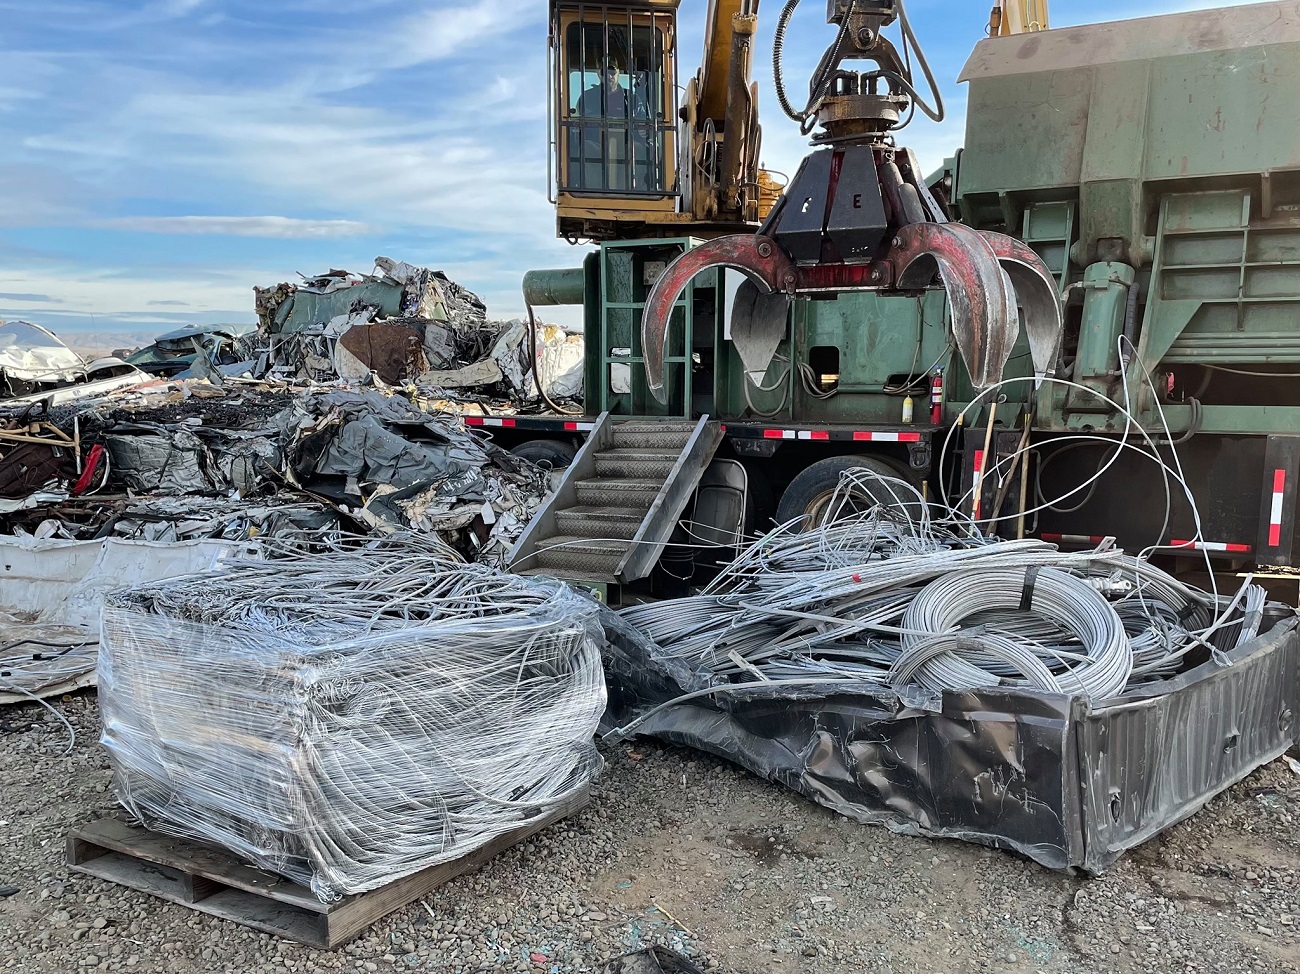 PNW Metal Recycling Acquires Mayflower Metals